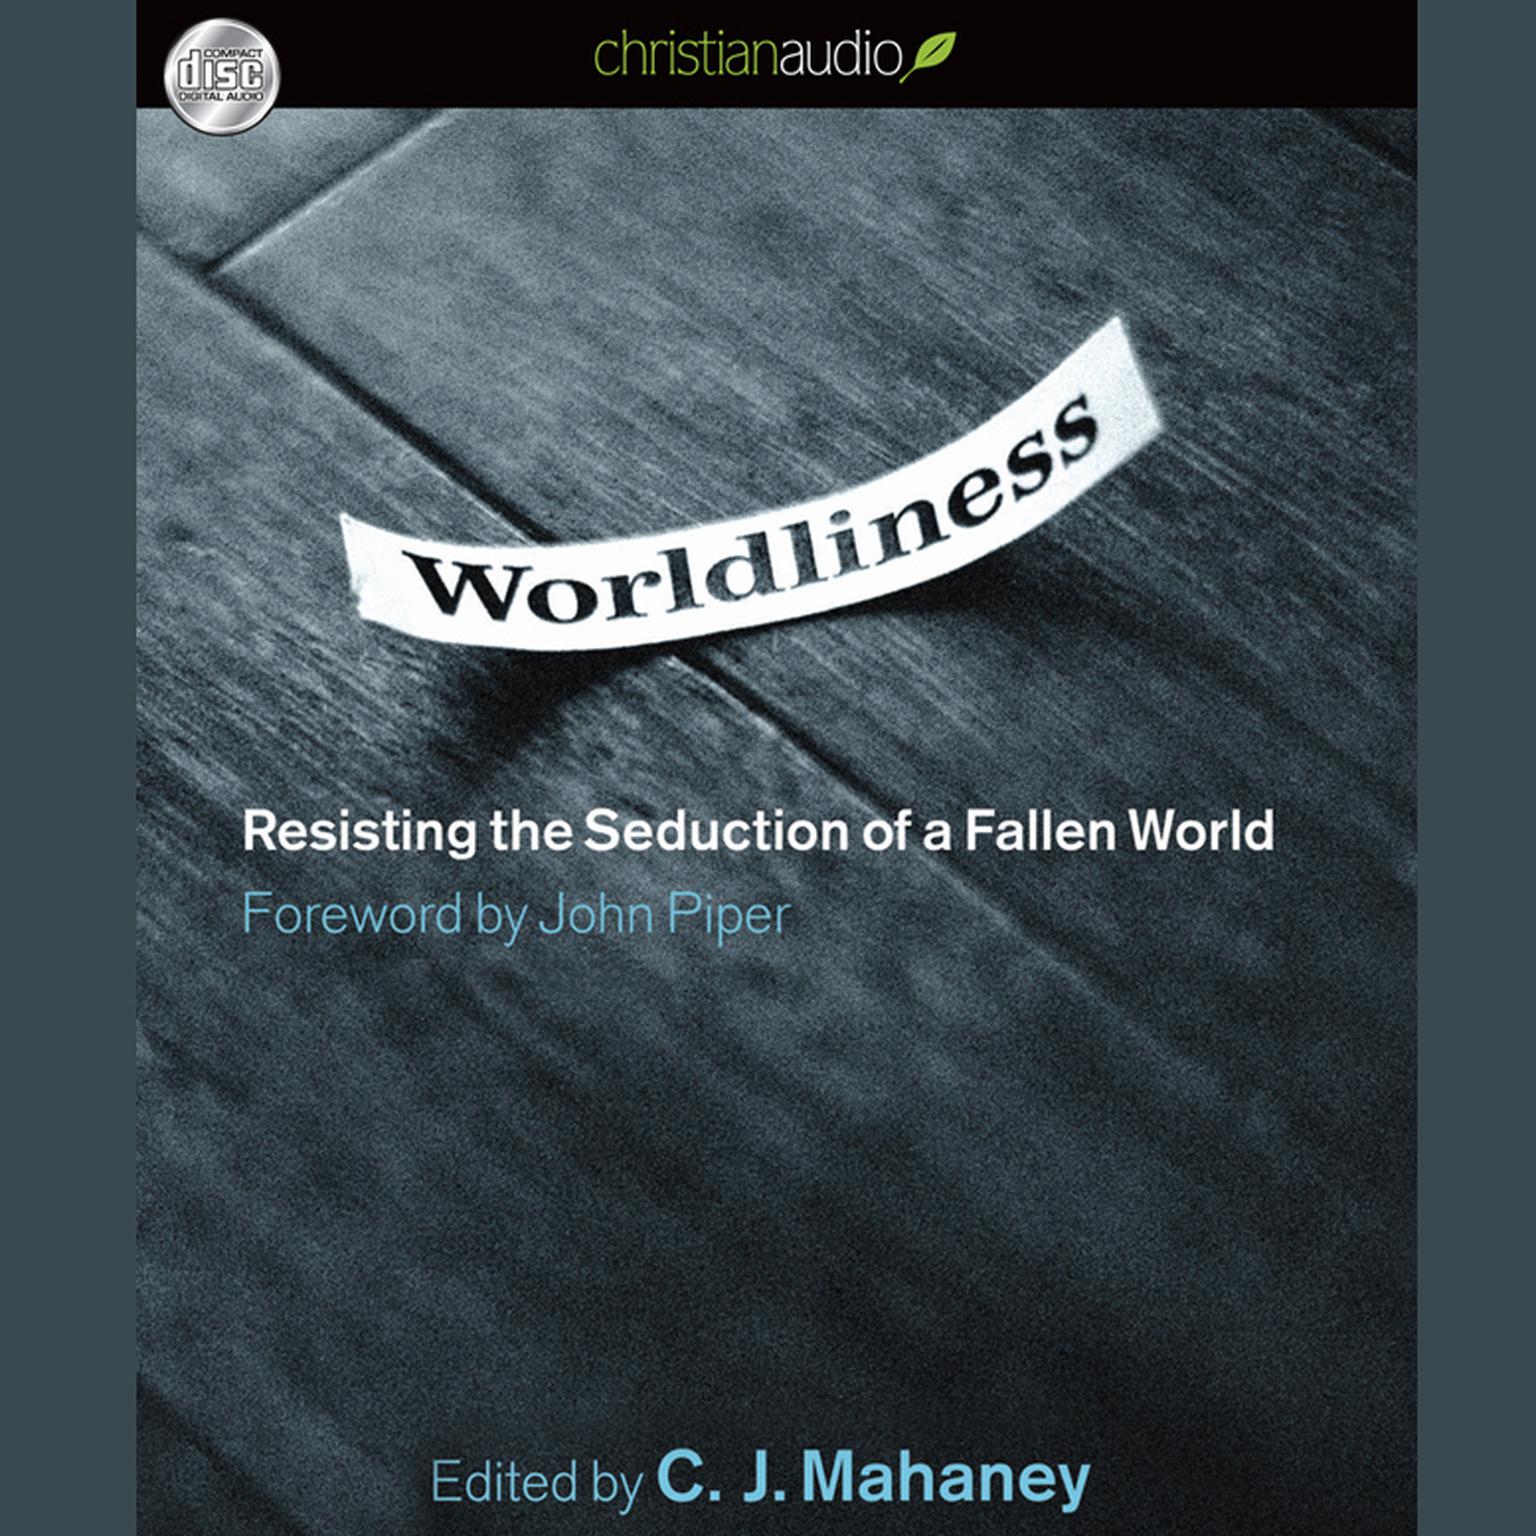 Worldliness: Resisting the Seduction of a Fallen World Audiobook, by C. J. Mahaney